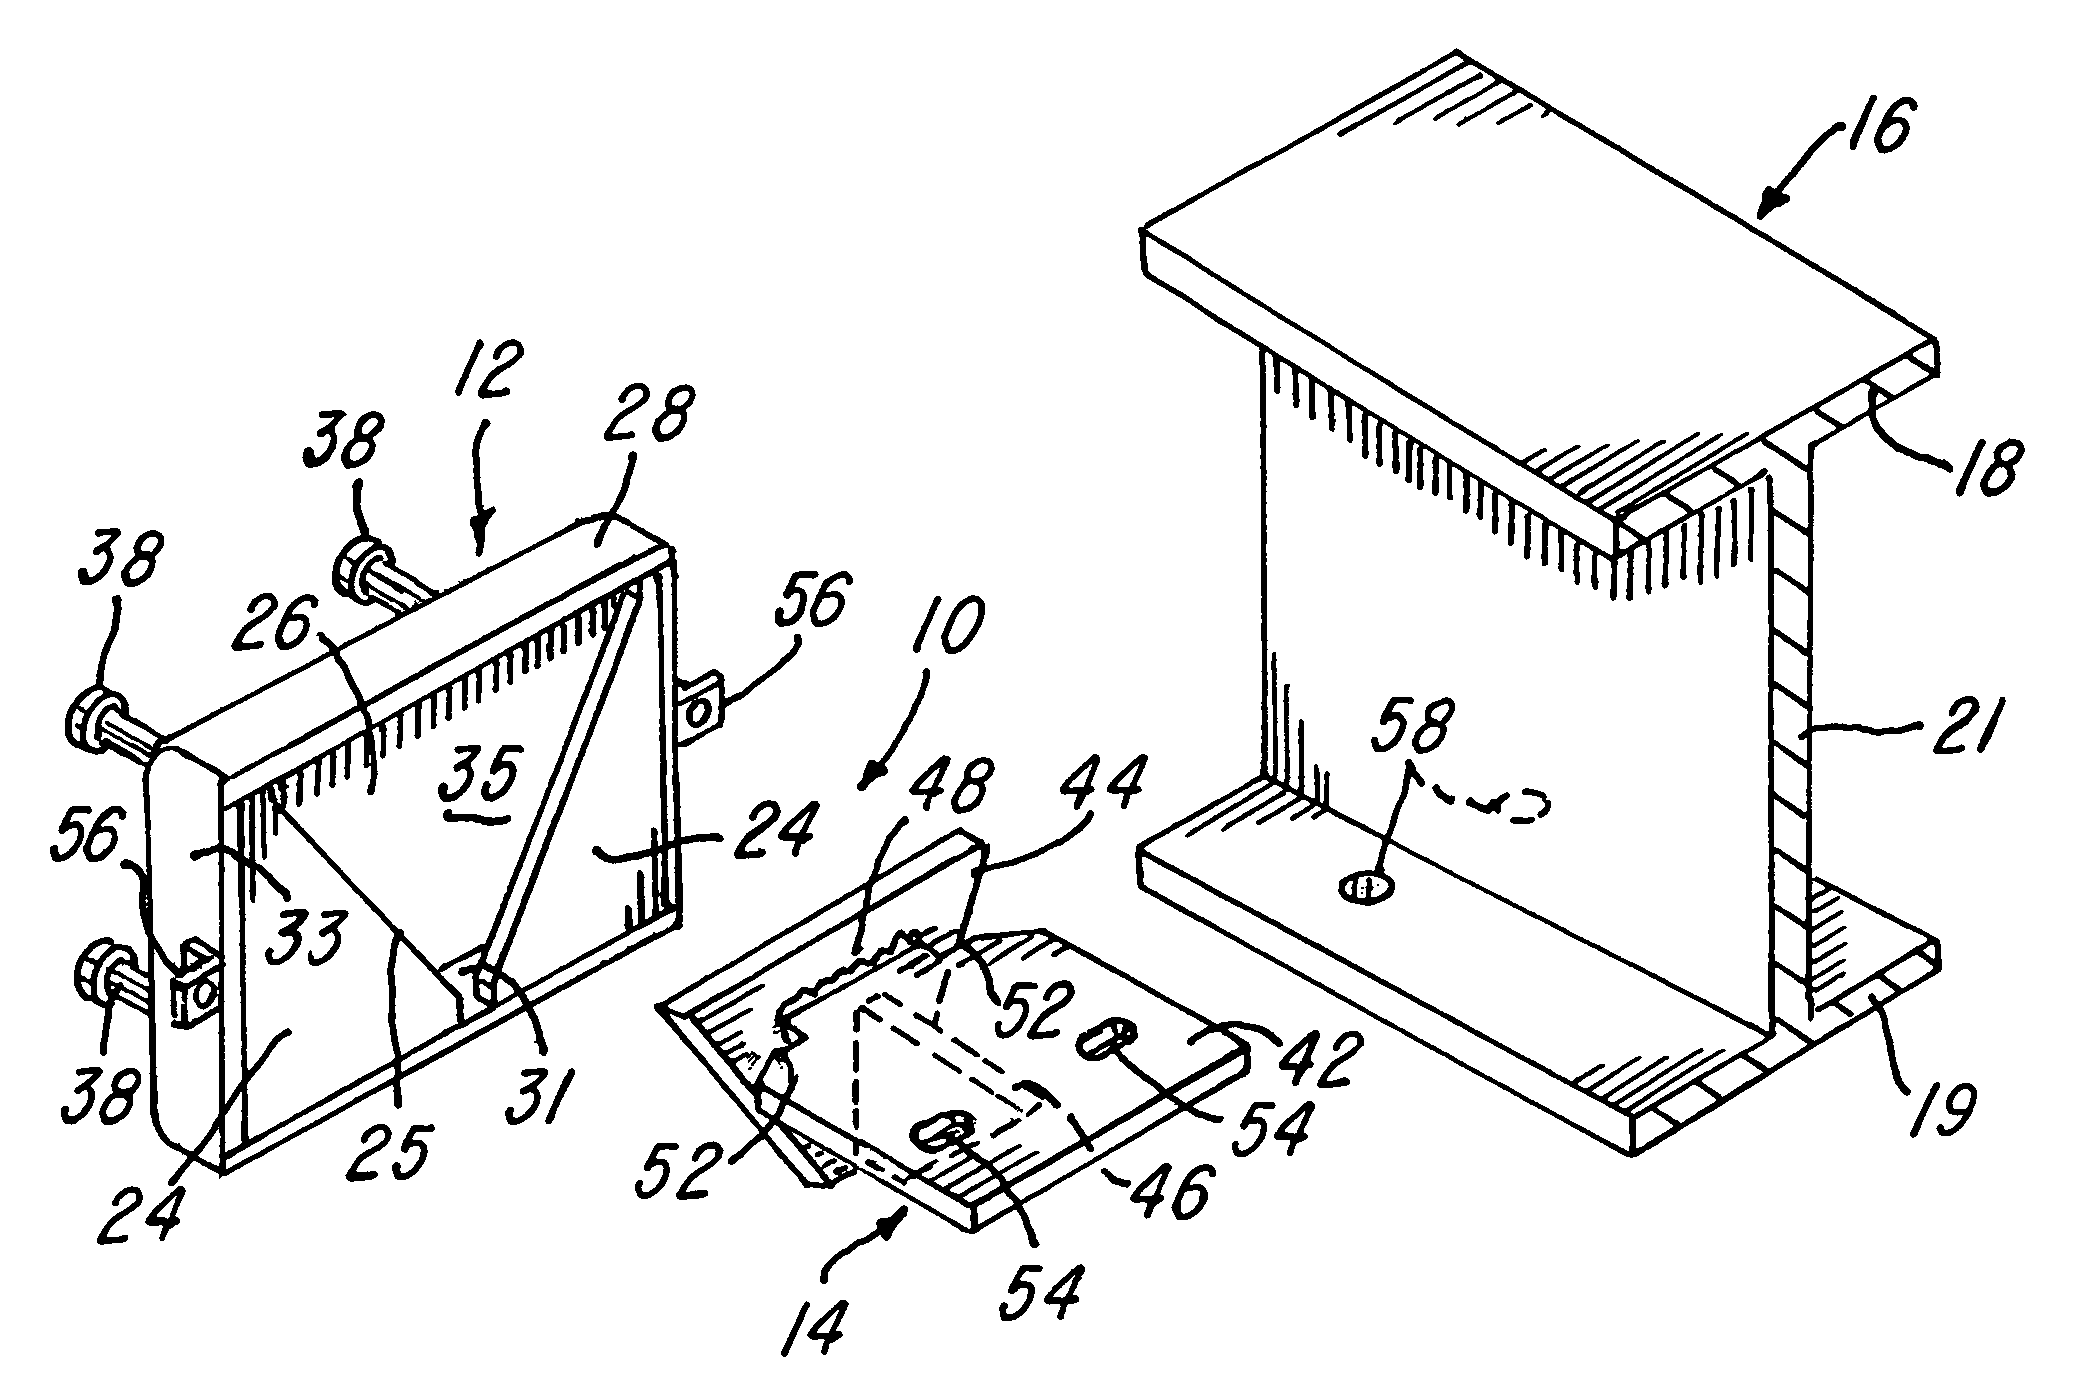 Connector system for securing an end portion of a steel structural member to a vertical cast concrete member